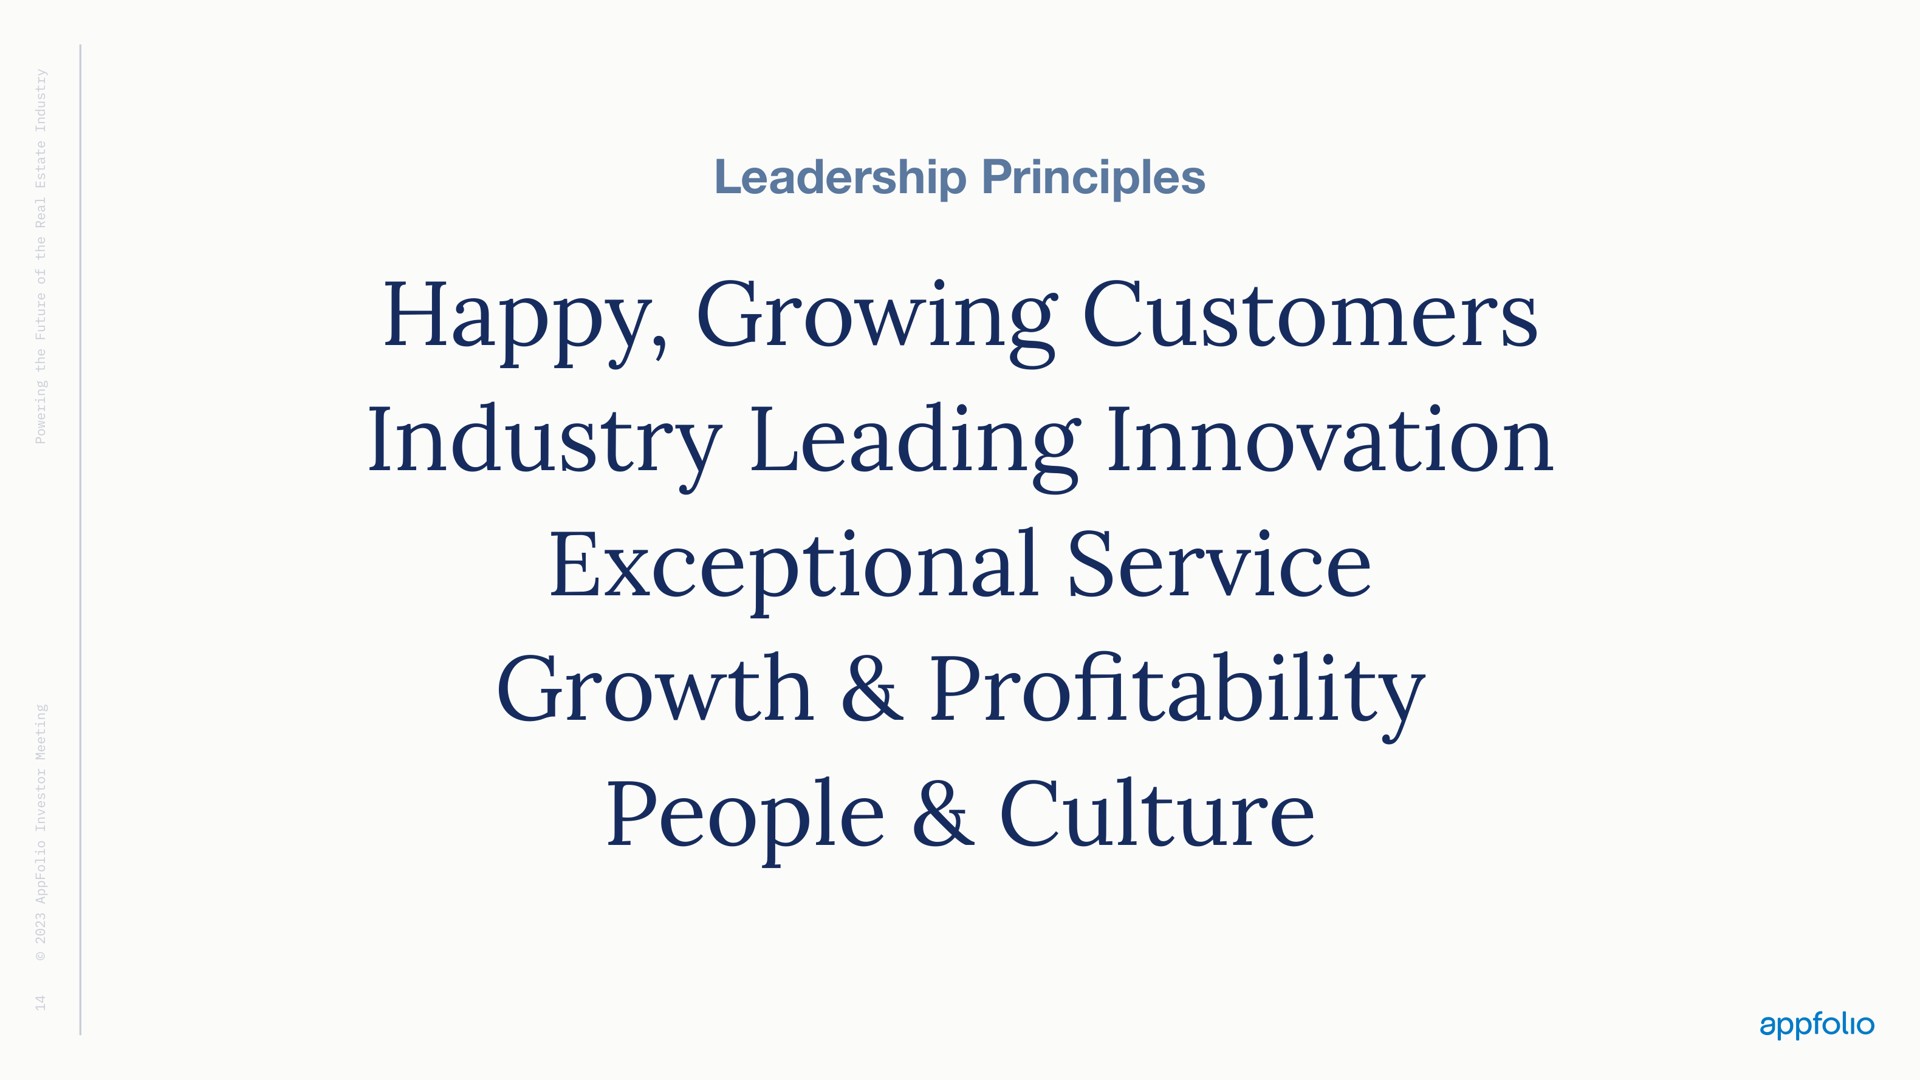 leadership principles happy growing customers industry leading innovation exceptional service growth pro people culture profitability | AppFolio